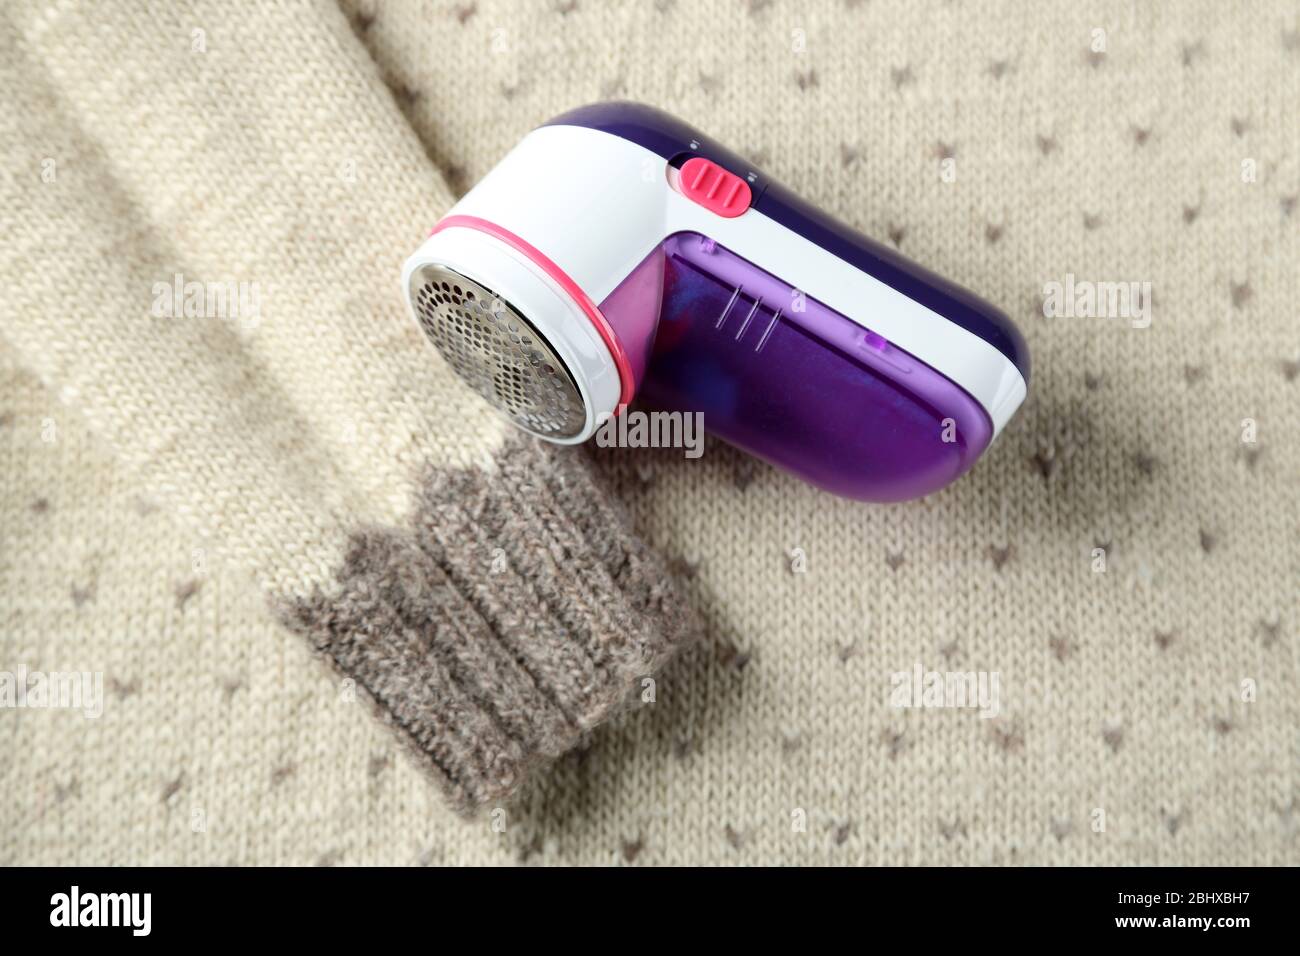 Wool shaver on wool sweater background Stock Photo